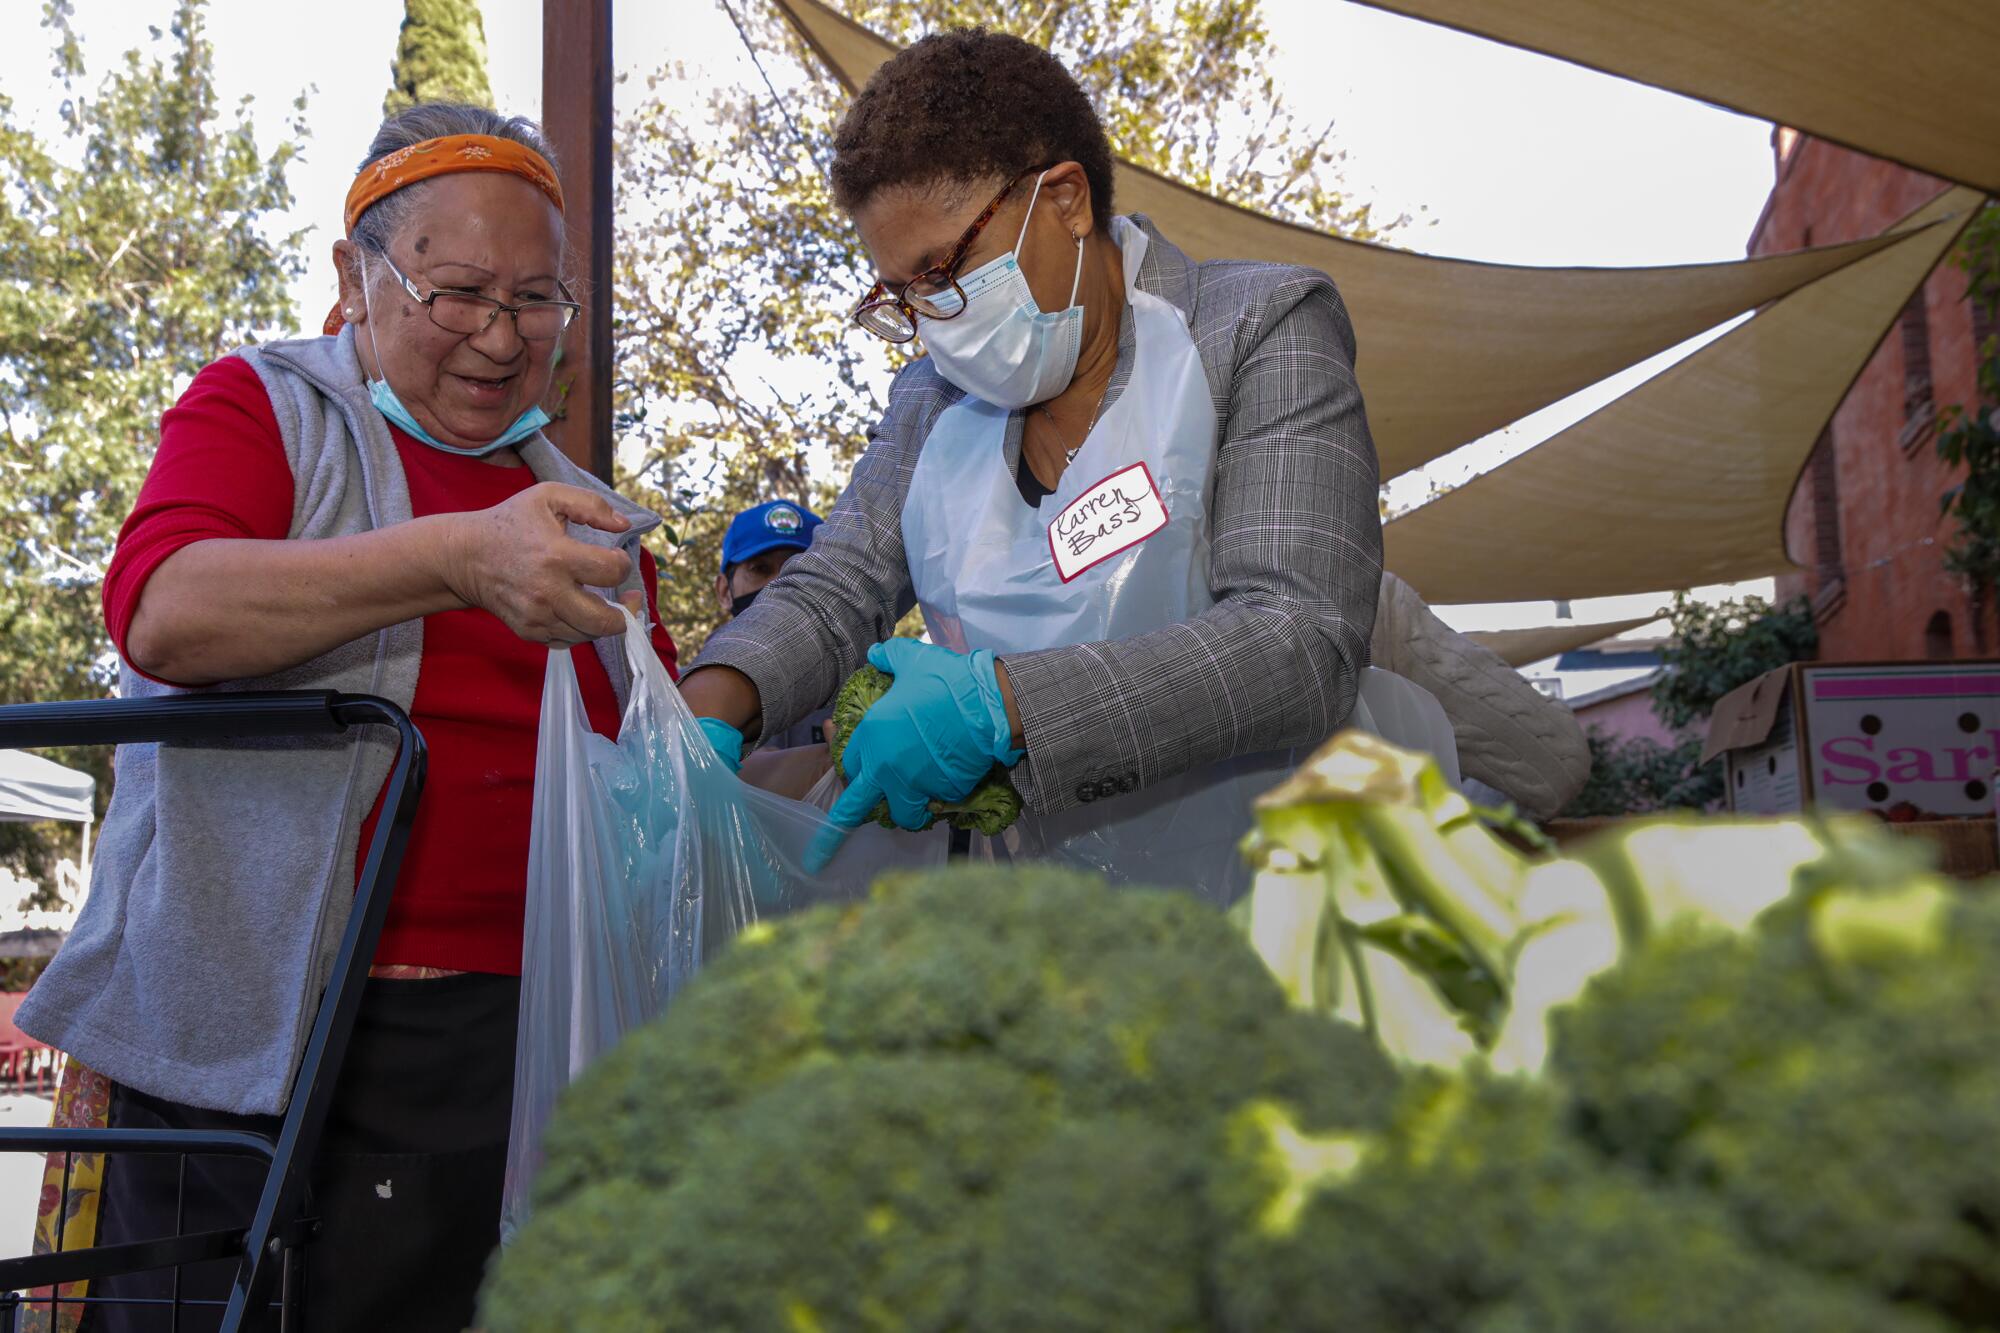 Karen Bass, right, distributes produce to a woman at a farmers market.